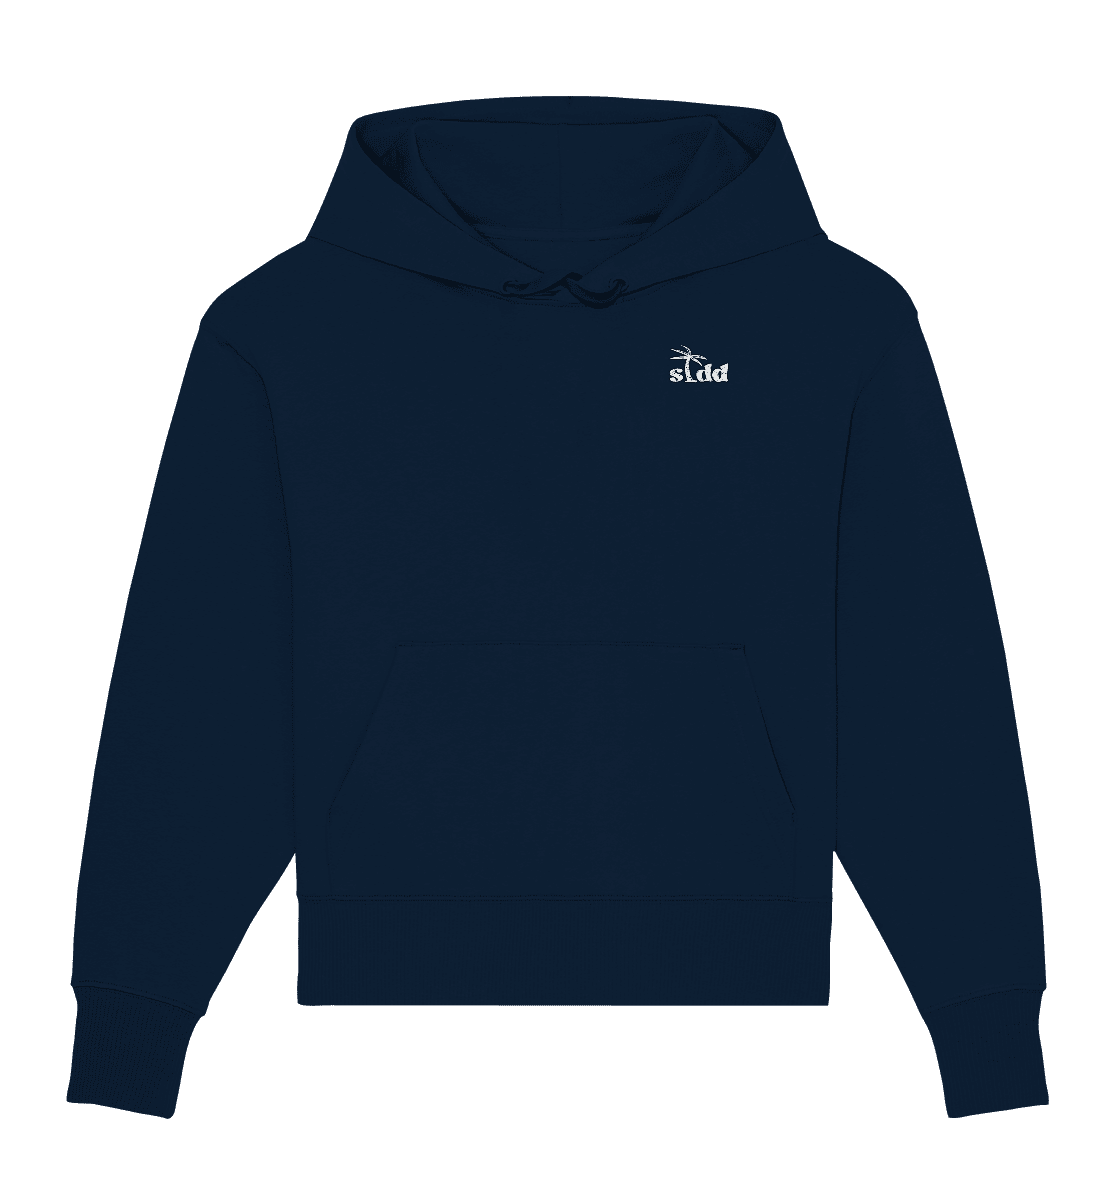 Social Distance Collection - Organic Oversize Hoodie